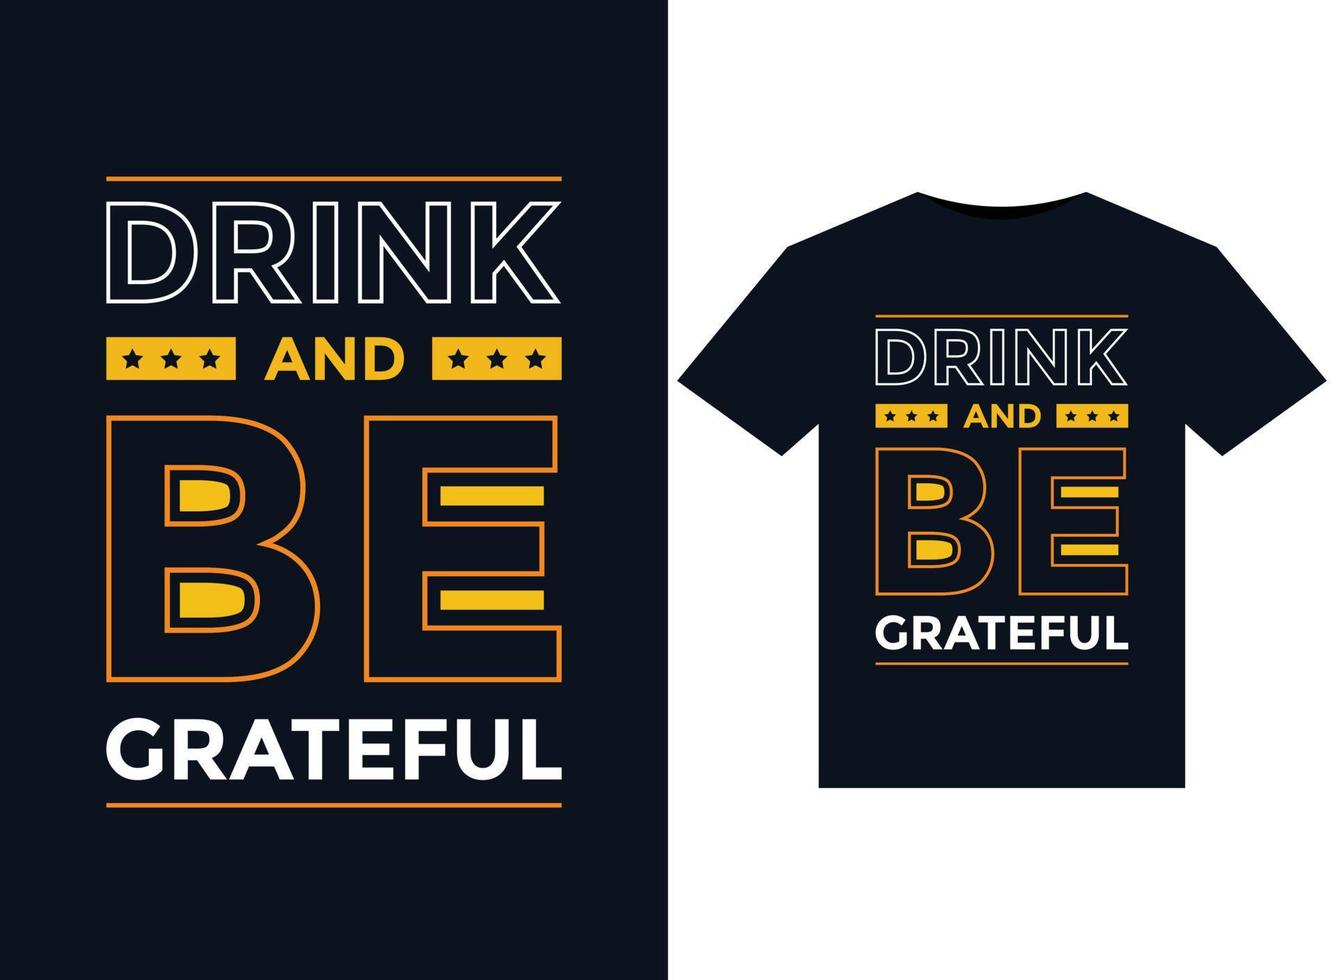 Drink And Be Grateful T-Shirts typography vector illustration for print-ready graphic design